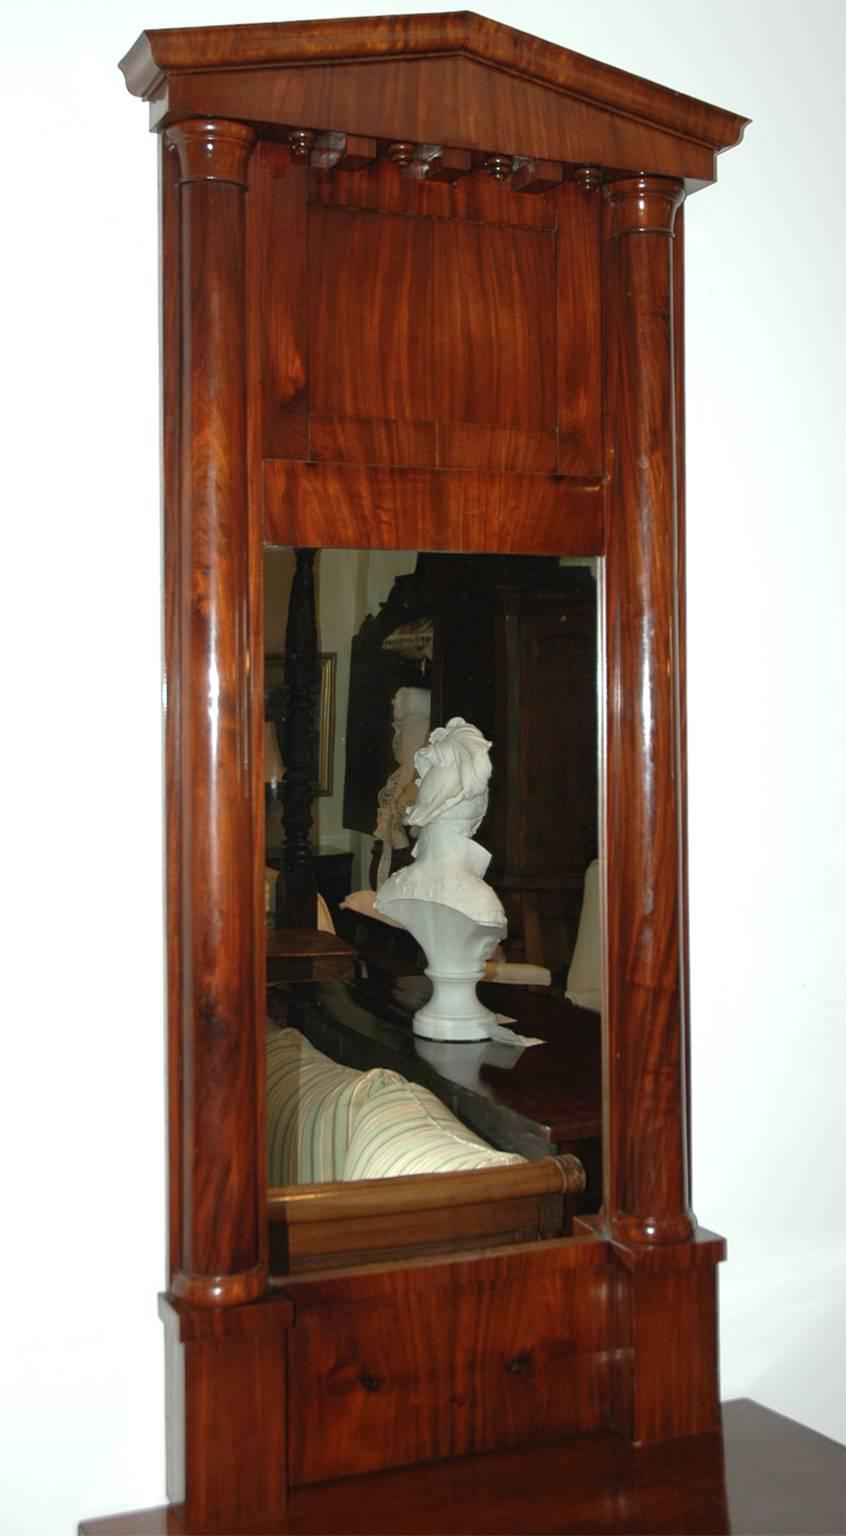 Biedermeier console mirror in figured mahogany with pediment top over two pilasters that flank mirror, Northern Germany, circa 1820.

Measures: 27 1/4